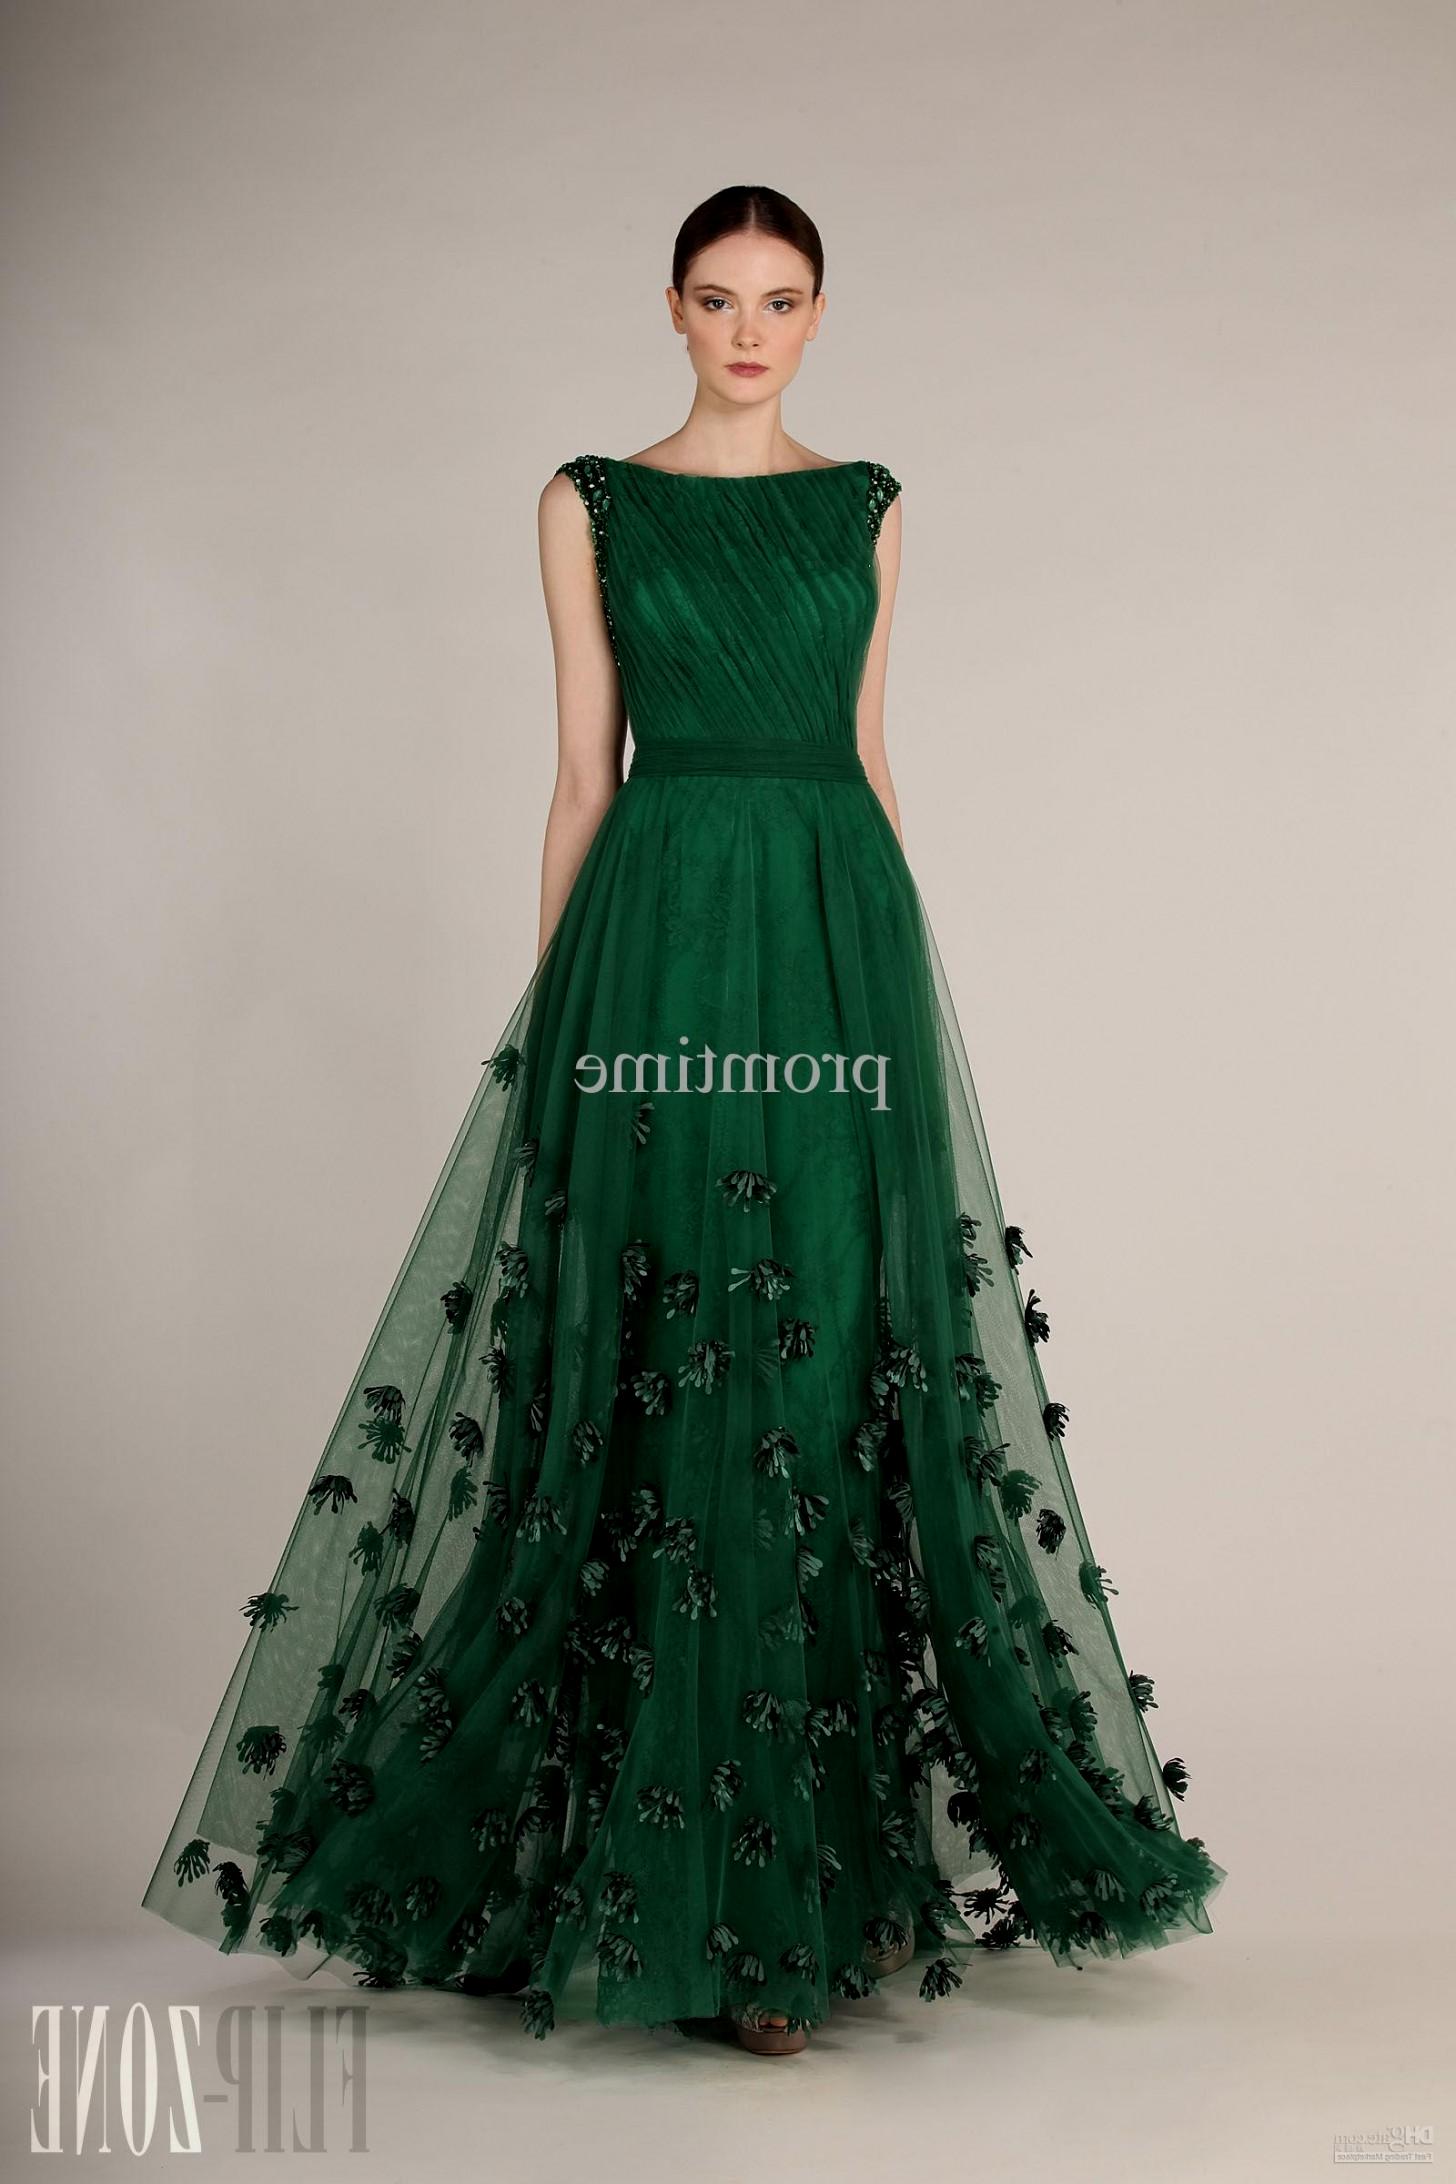 Elegant Emerald Green Dress And Online Fashion Review